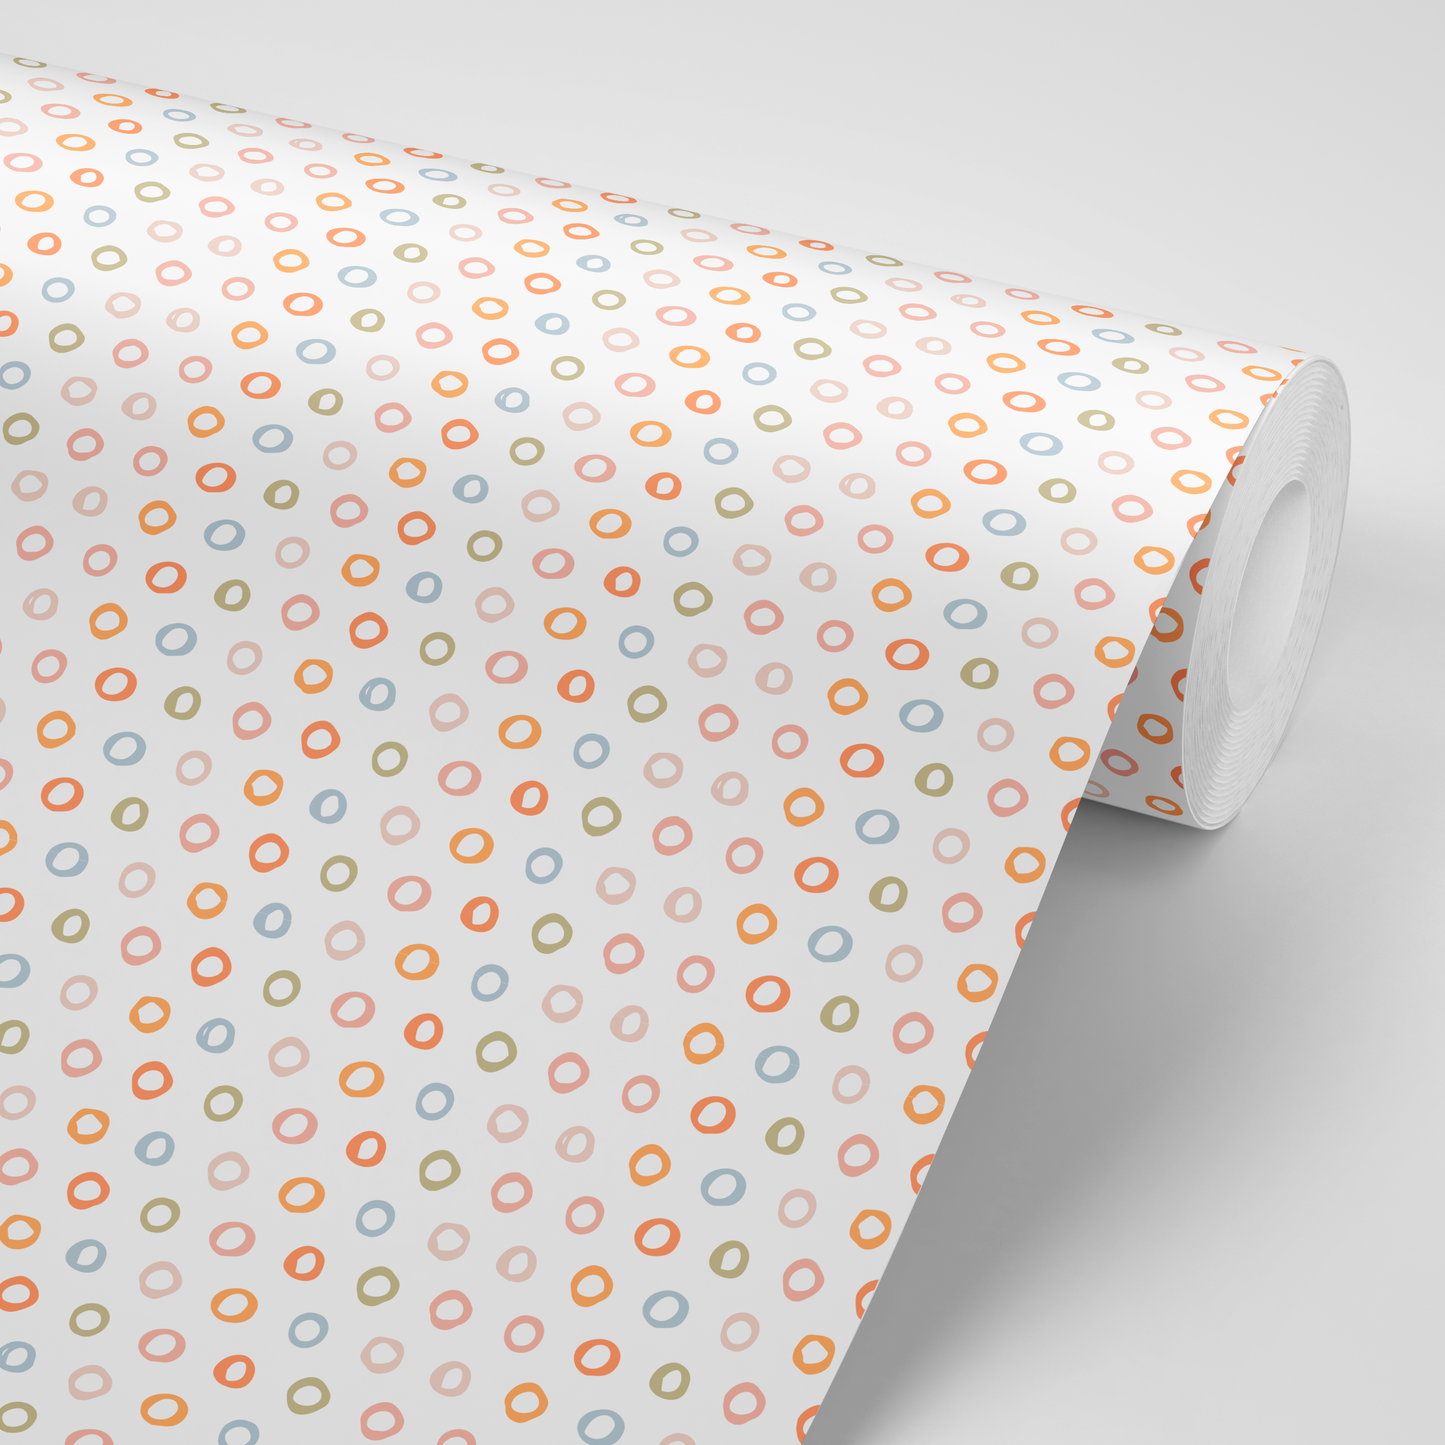 Donut Party Contact Paper  - pack of 3 rolls (24x48" each)